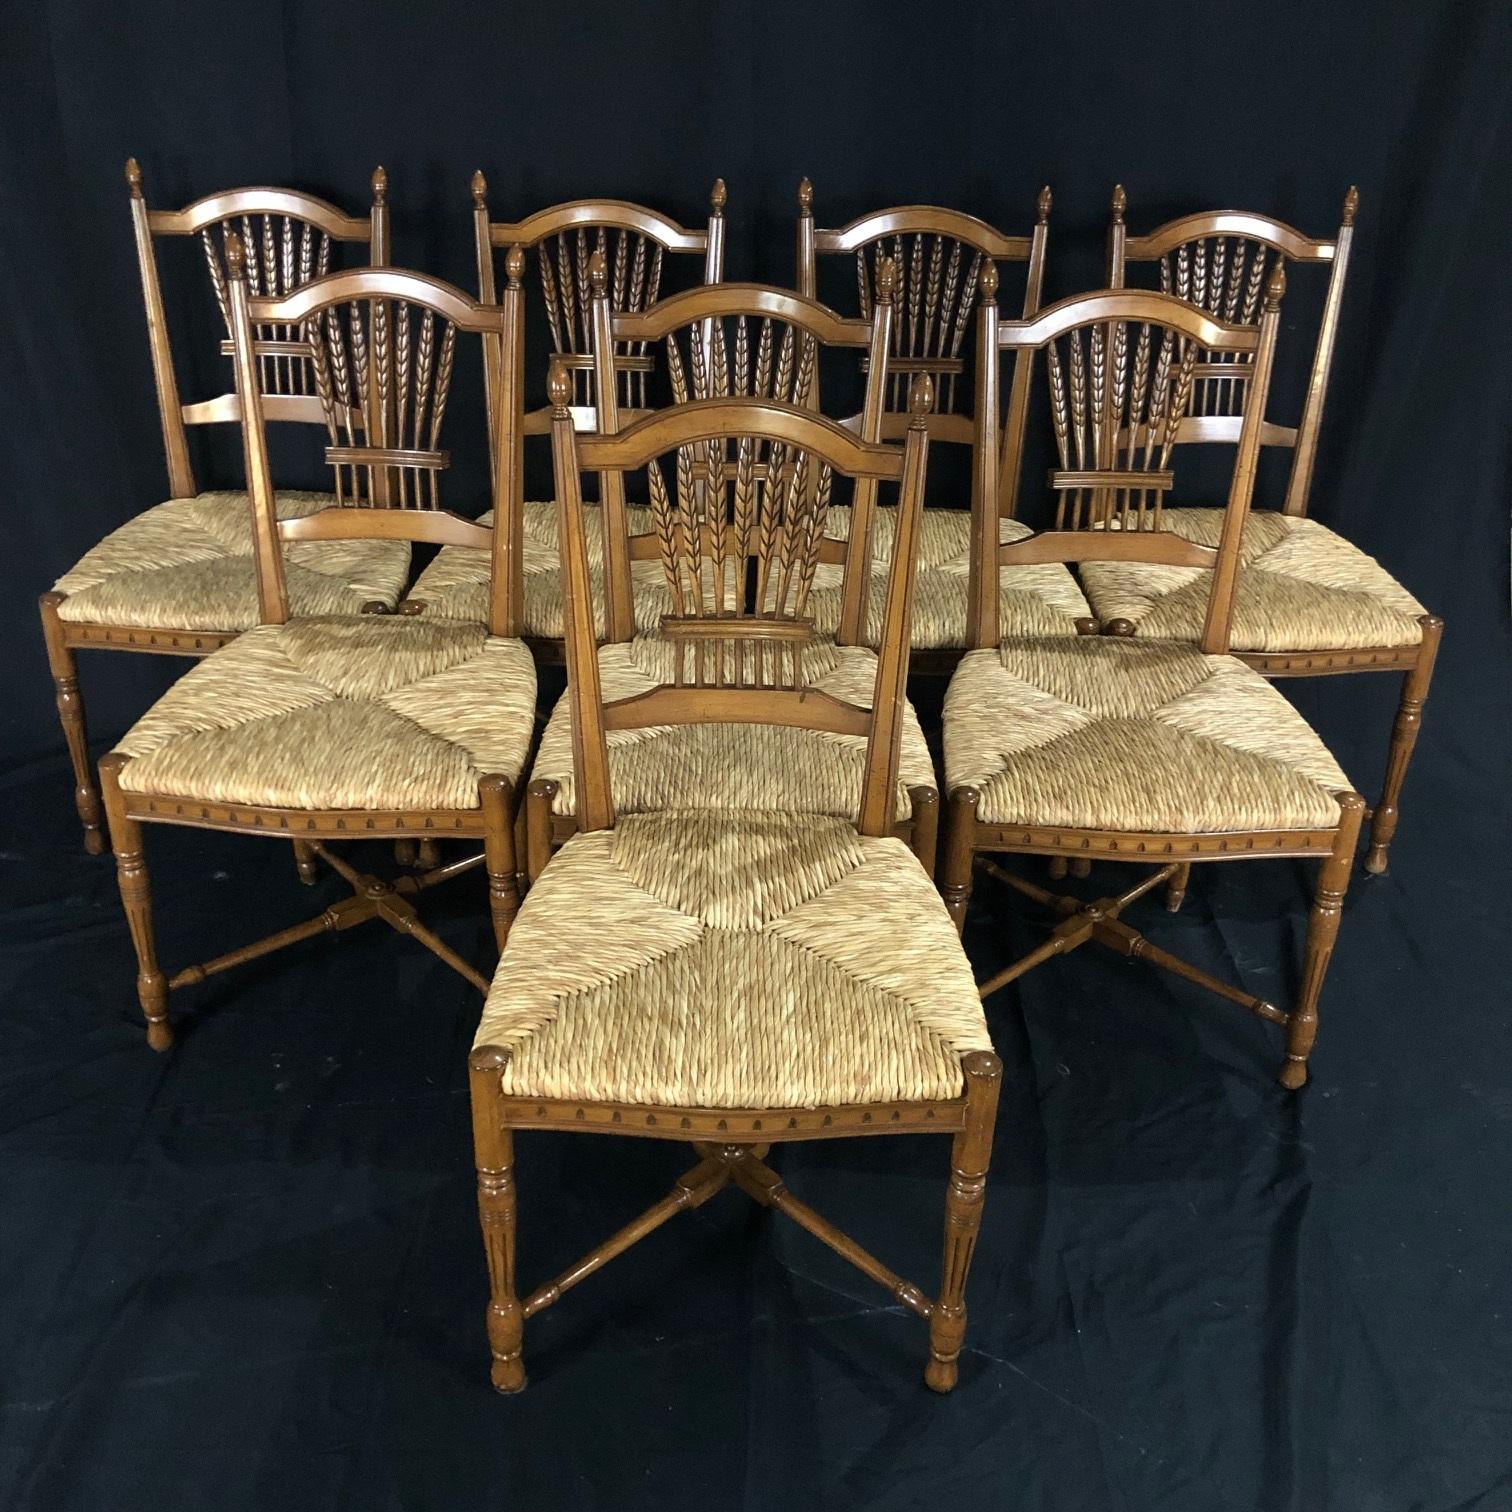 A lovely and sturdy set of eight French walnut dining chairs having rush seats and wheat sheaf designed backs. The complete set showcases a carved sheaf back with turned supports. The rush seats rest on four turned legs connected to one another